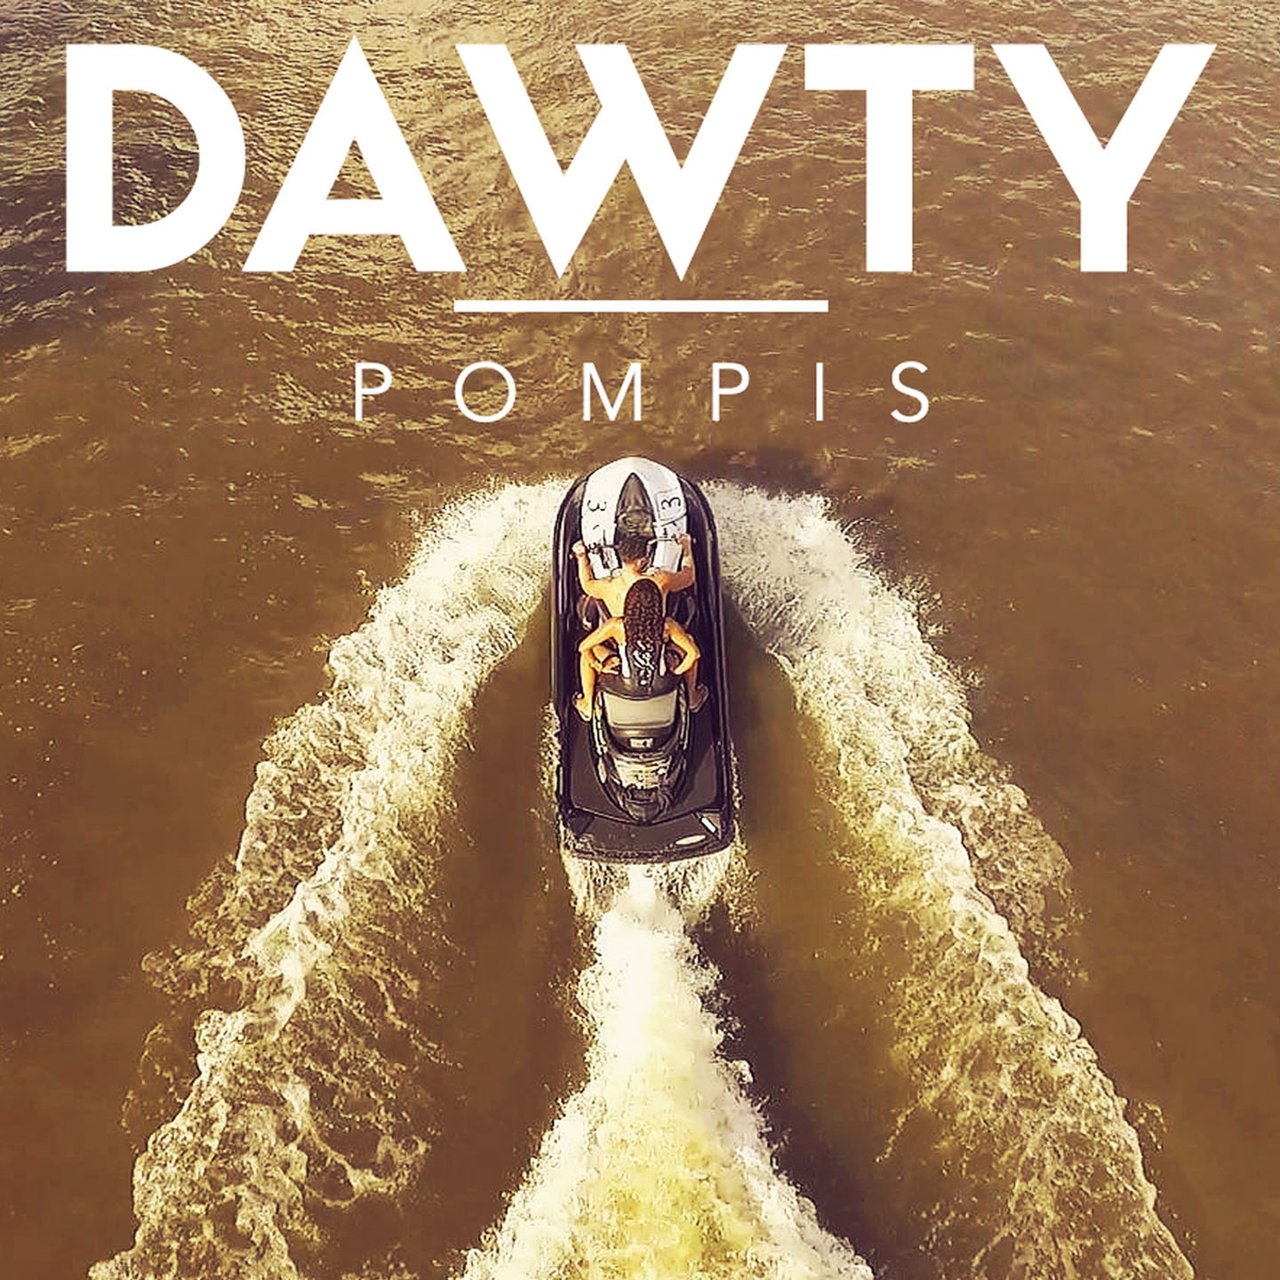 Pompis - Dawty (Cover)